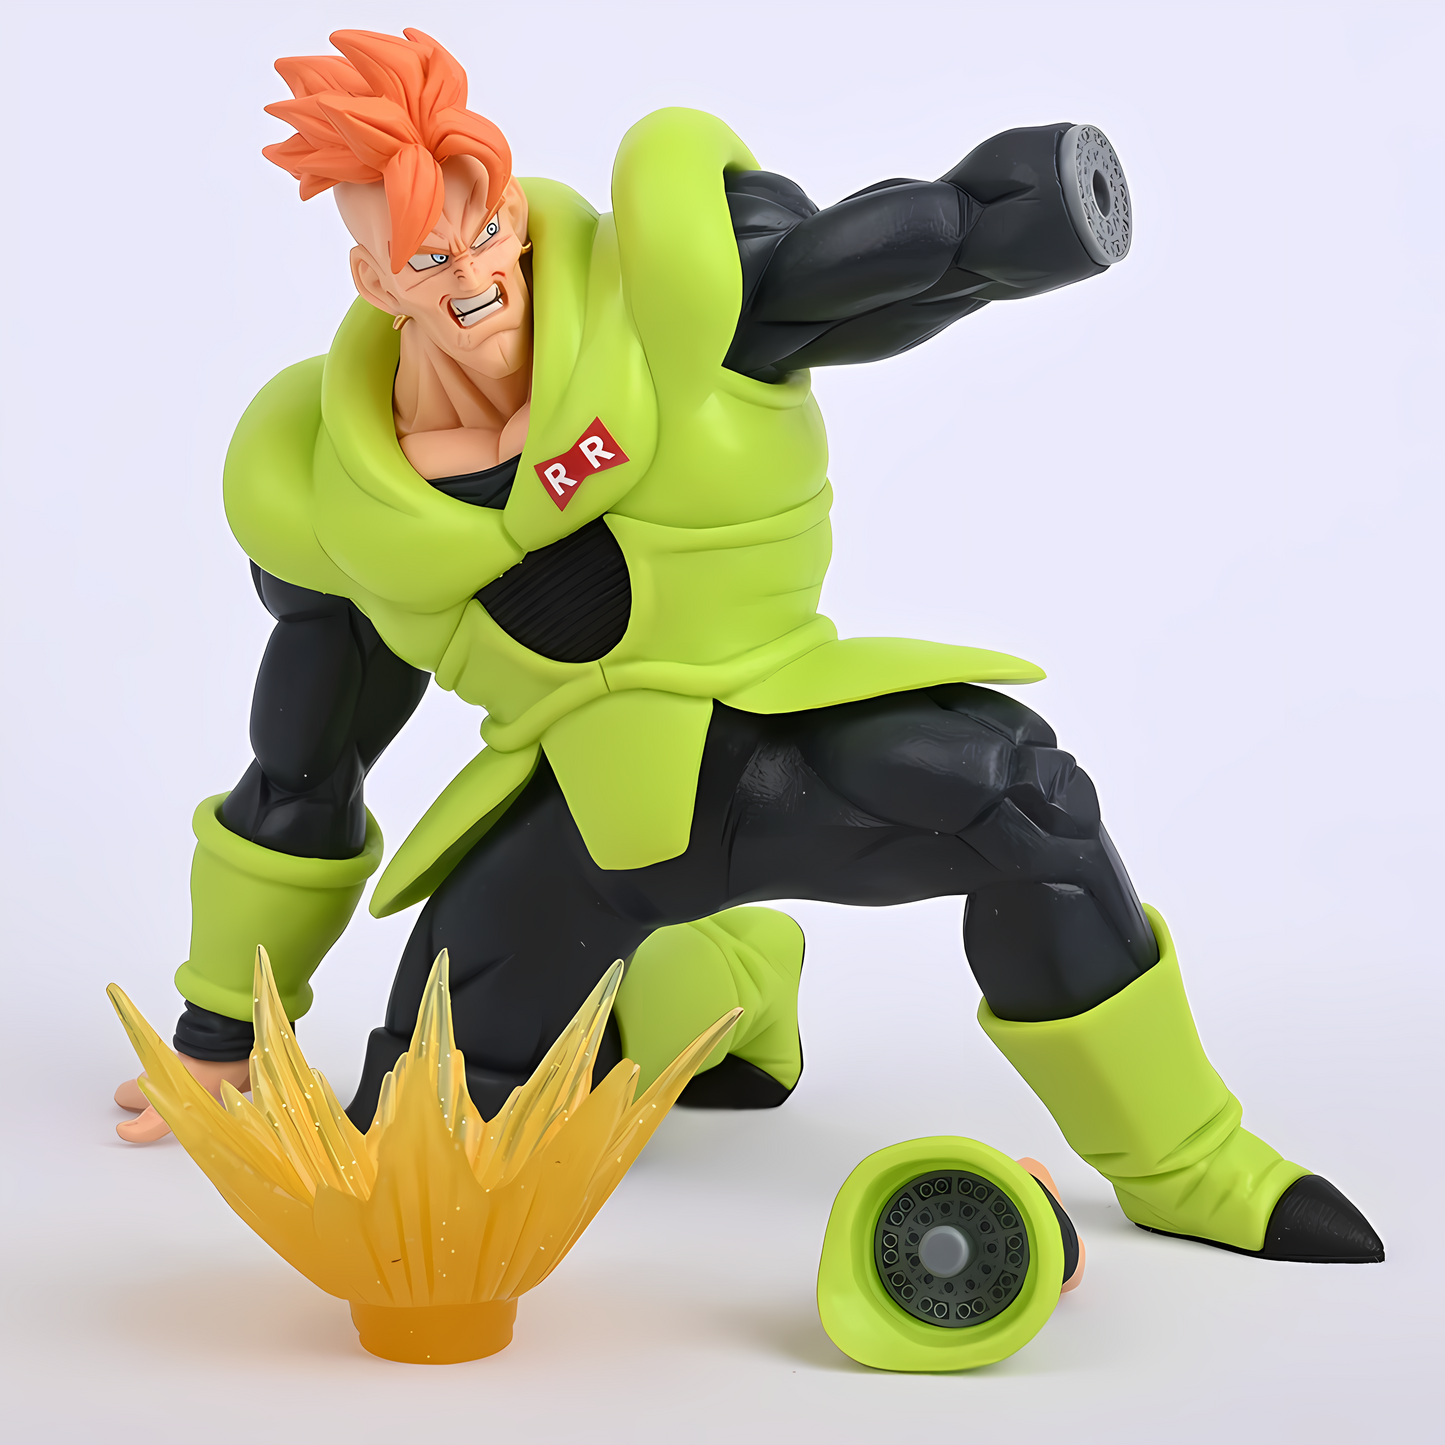 The Dragon Ball figure of Android 16 in a fighting stance, sporting his iconic green and black outfit with the Red Ribbon Army logo, captured against a plain background.